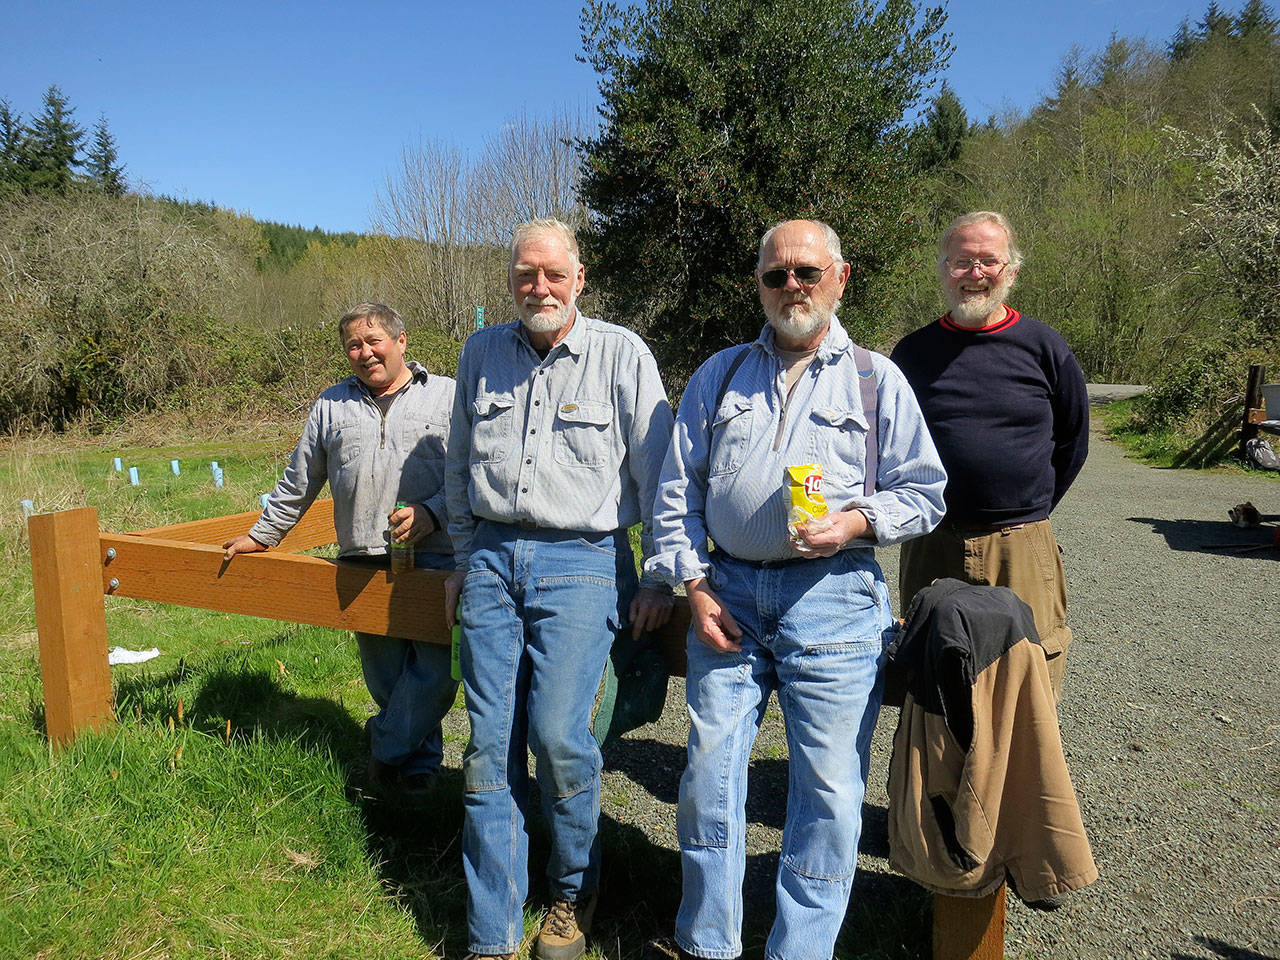 The North Olympic Land Trust’s Stewardship Crew, pictured at the Pysht River Conservation Area, includes, from left, Steve Langley, Curt Batey, Cal Thomas and Elden Housinger. (Lorrie Mittman)